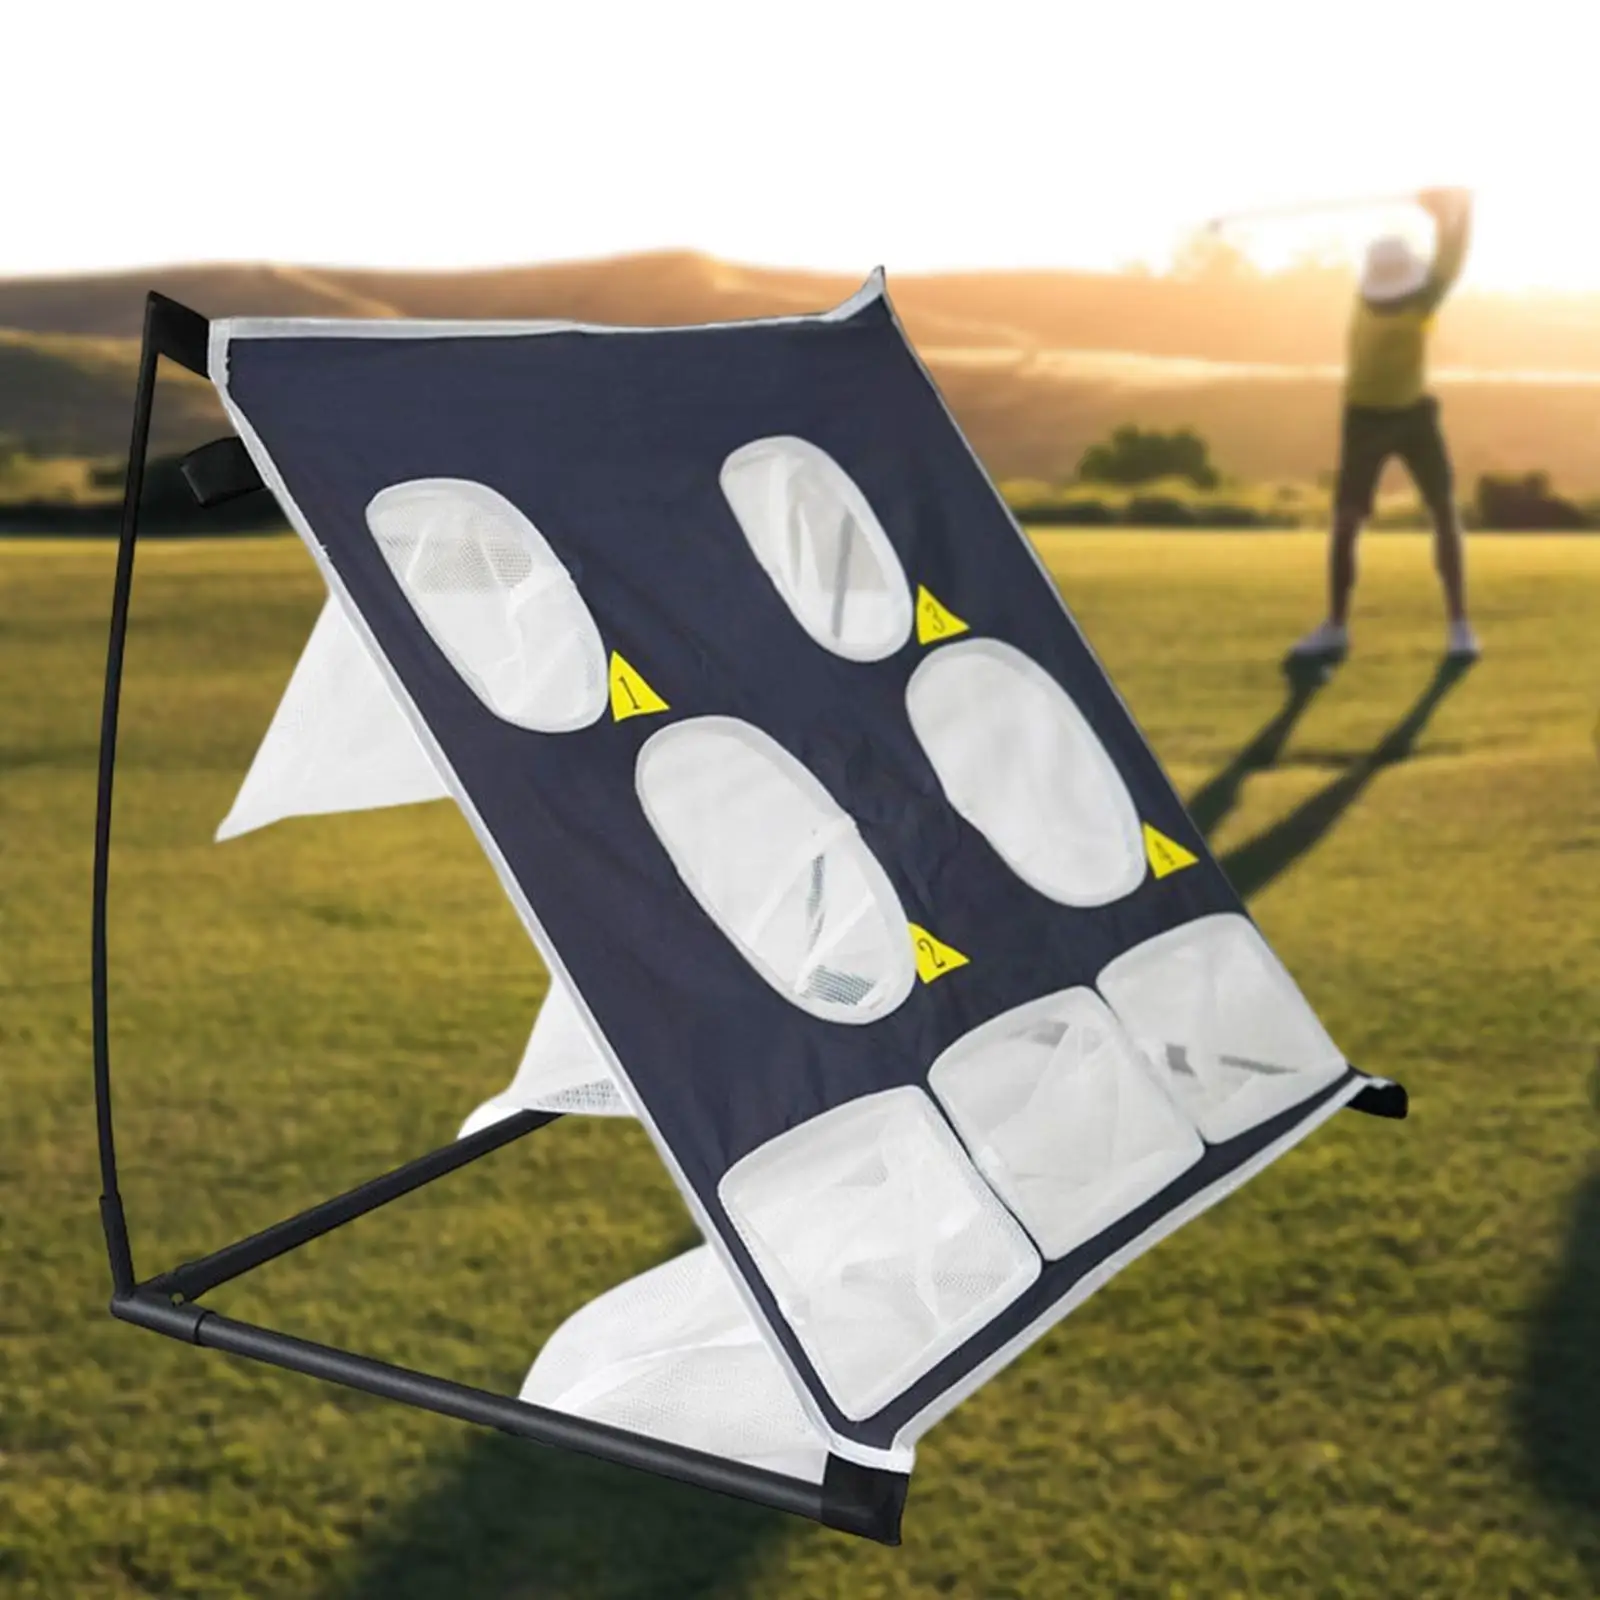 Golf Chipping Net Foldable Accessories Indoor Chipping Net for Training Aids